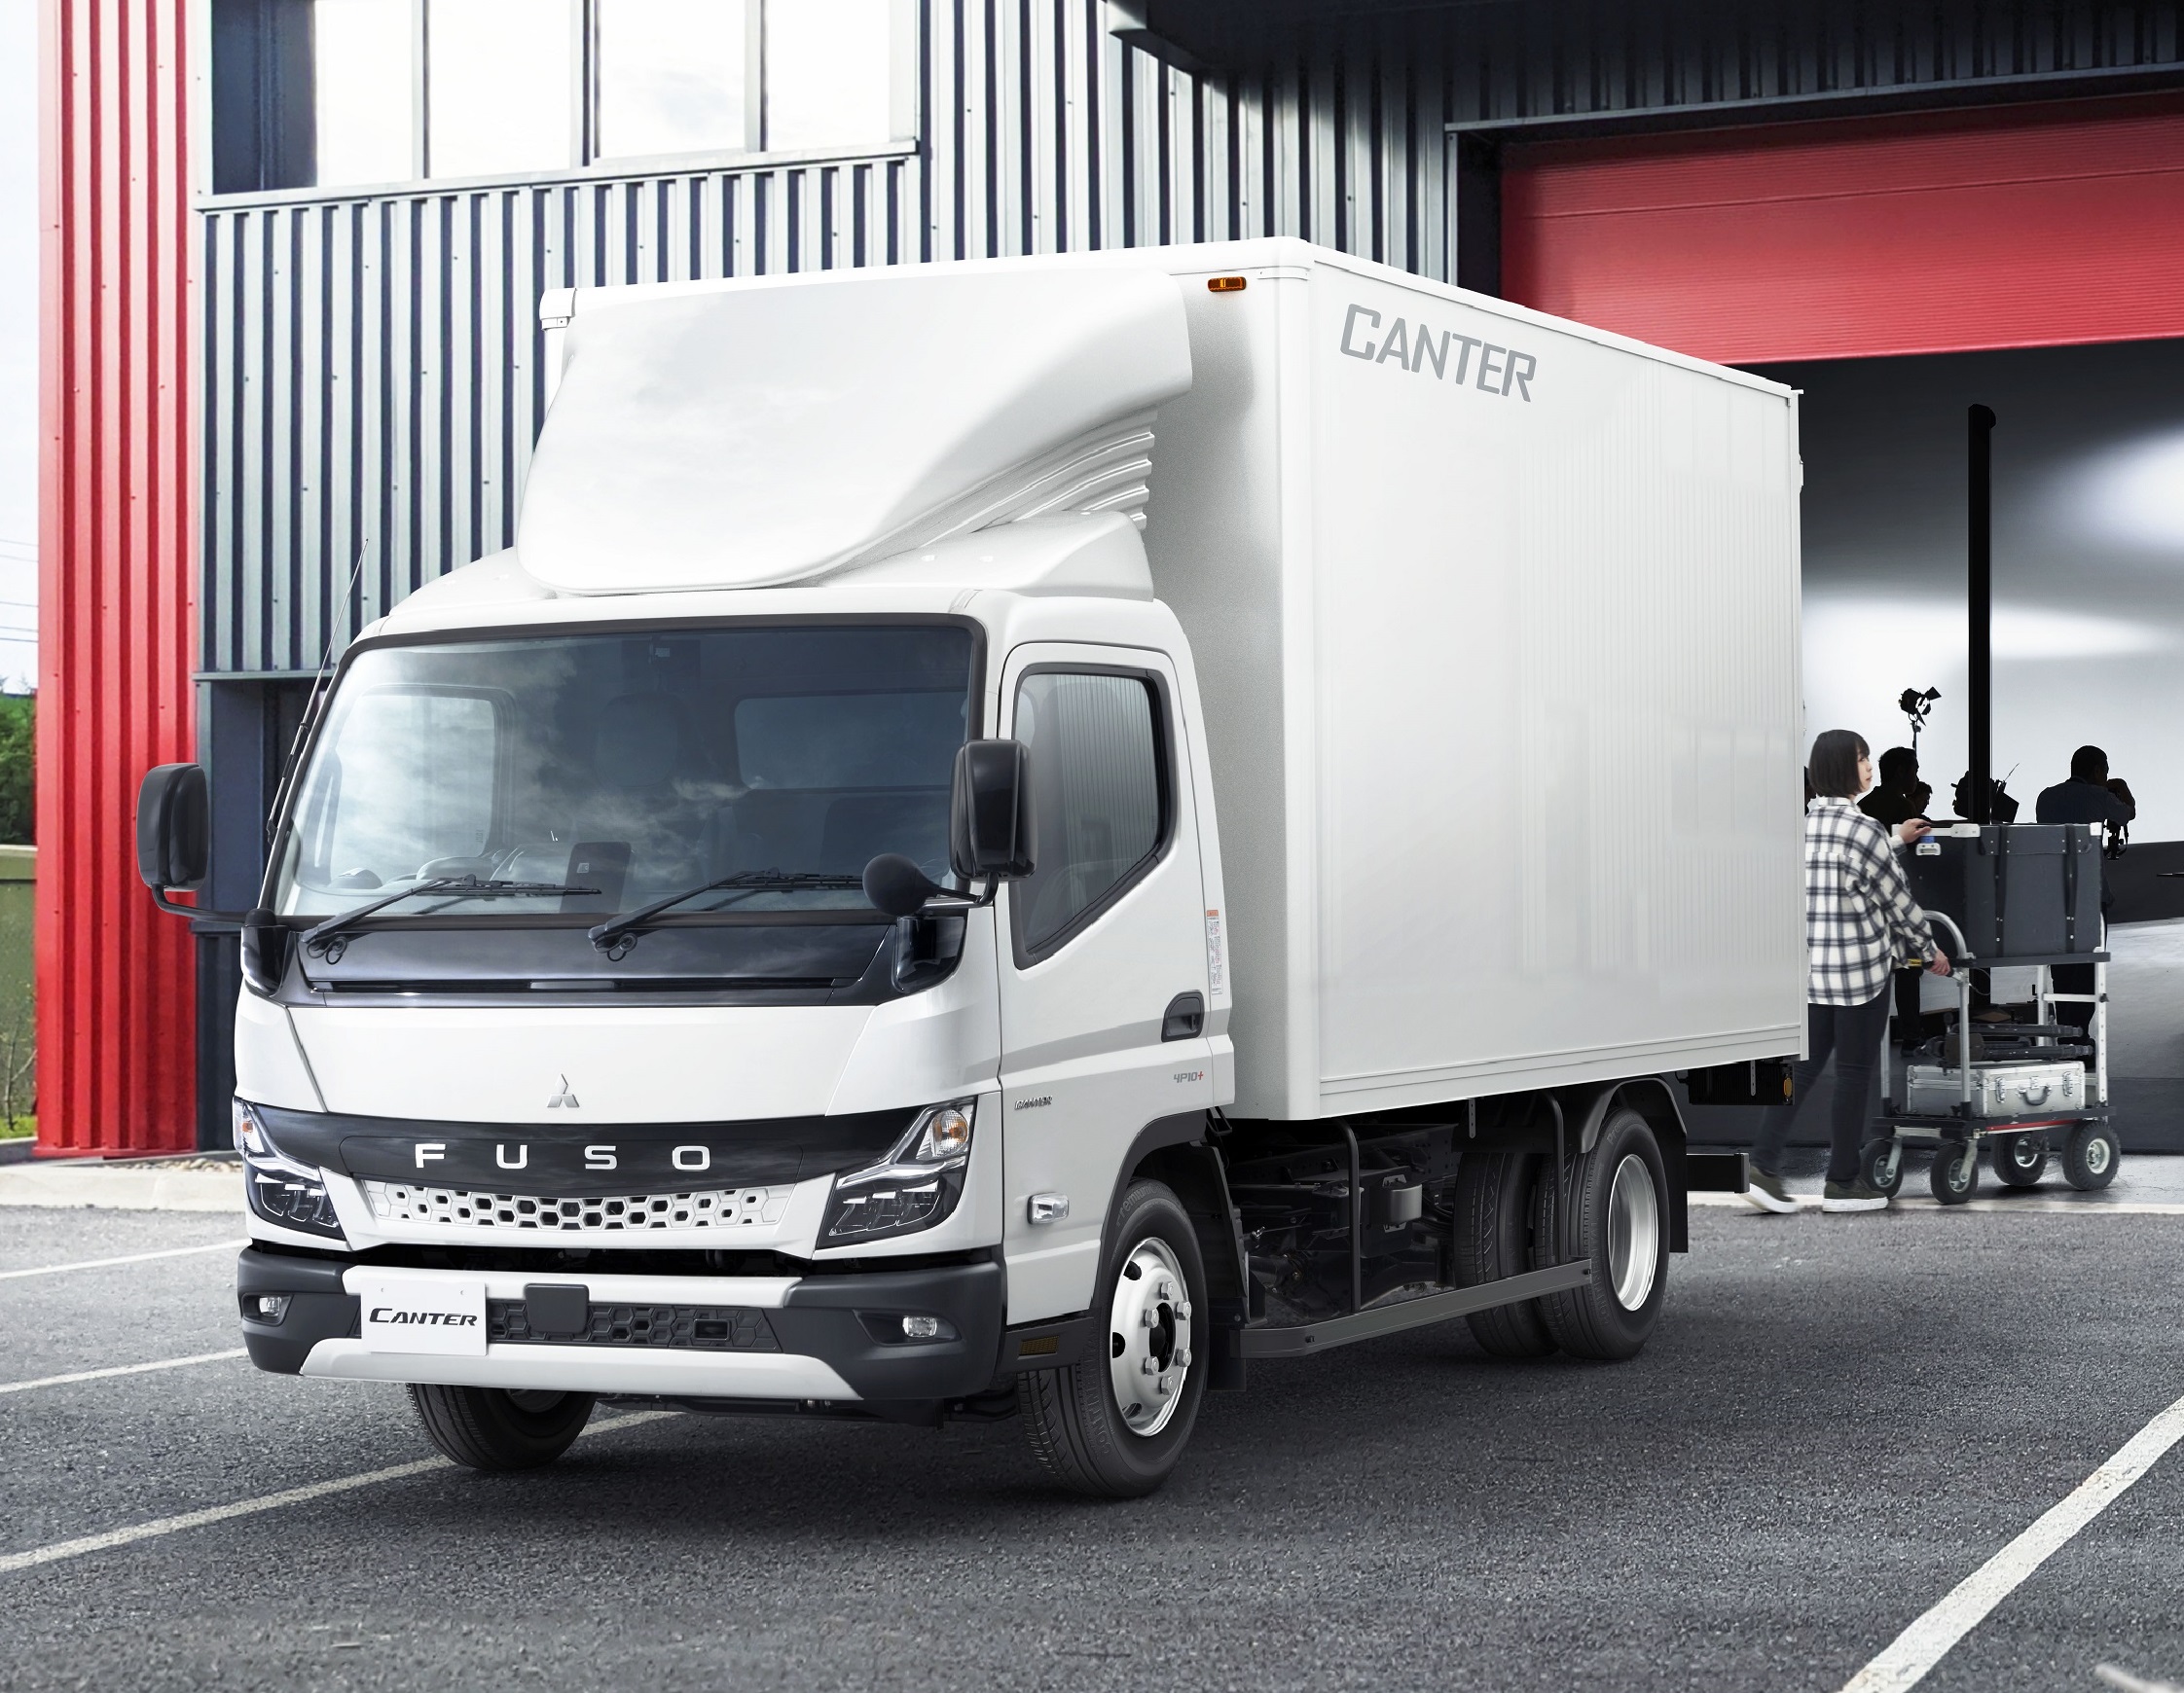 mitsubishi-fuso-launches-the-new-light-duty-canter-truck-in-japan